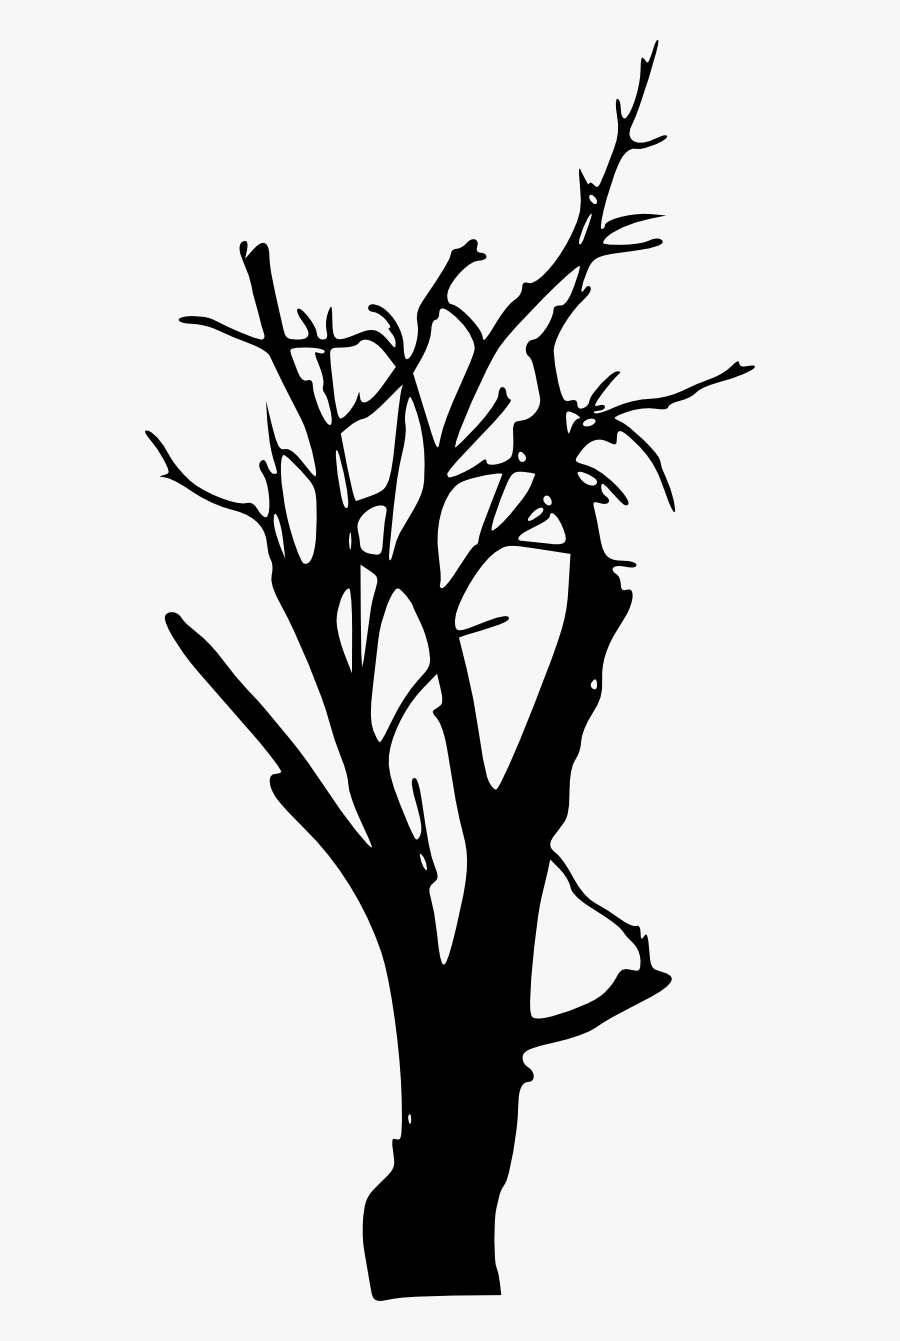 Bare Tree Images At - Bare Tree Silhouette, Transparent Clipart